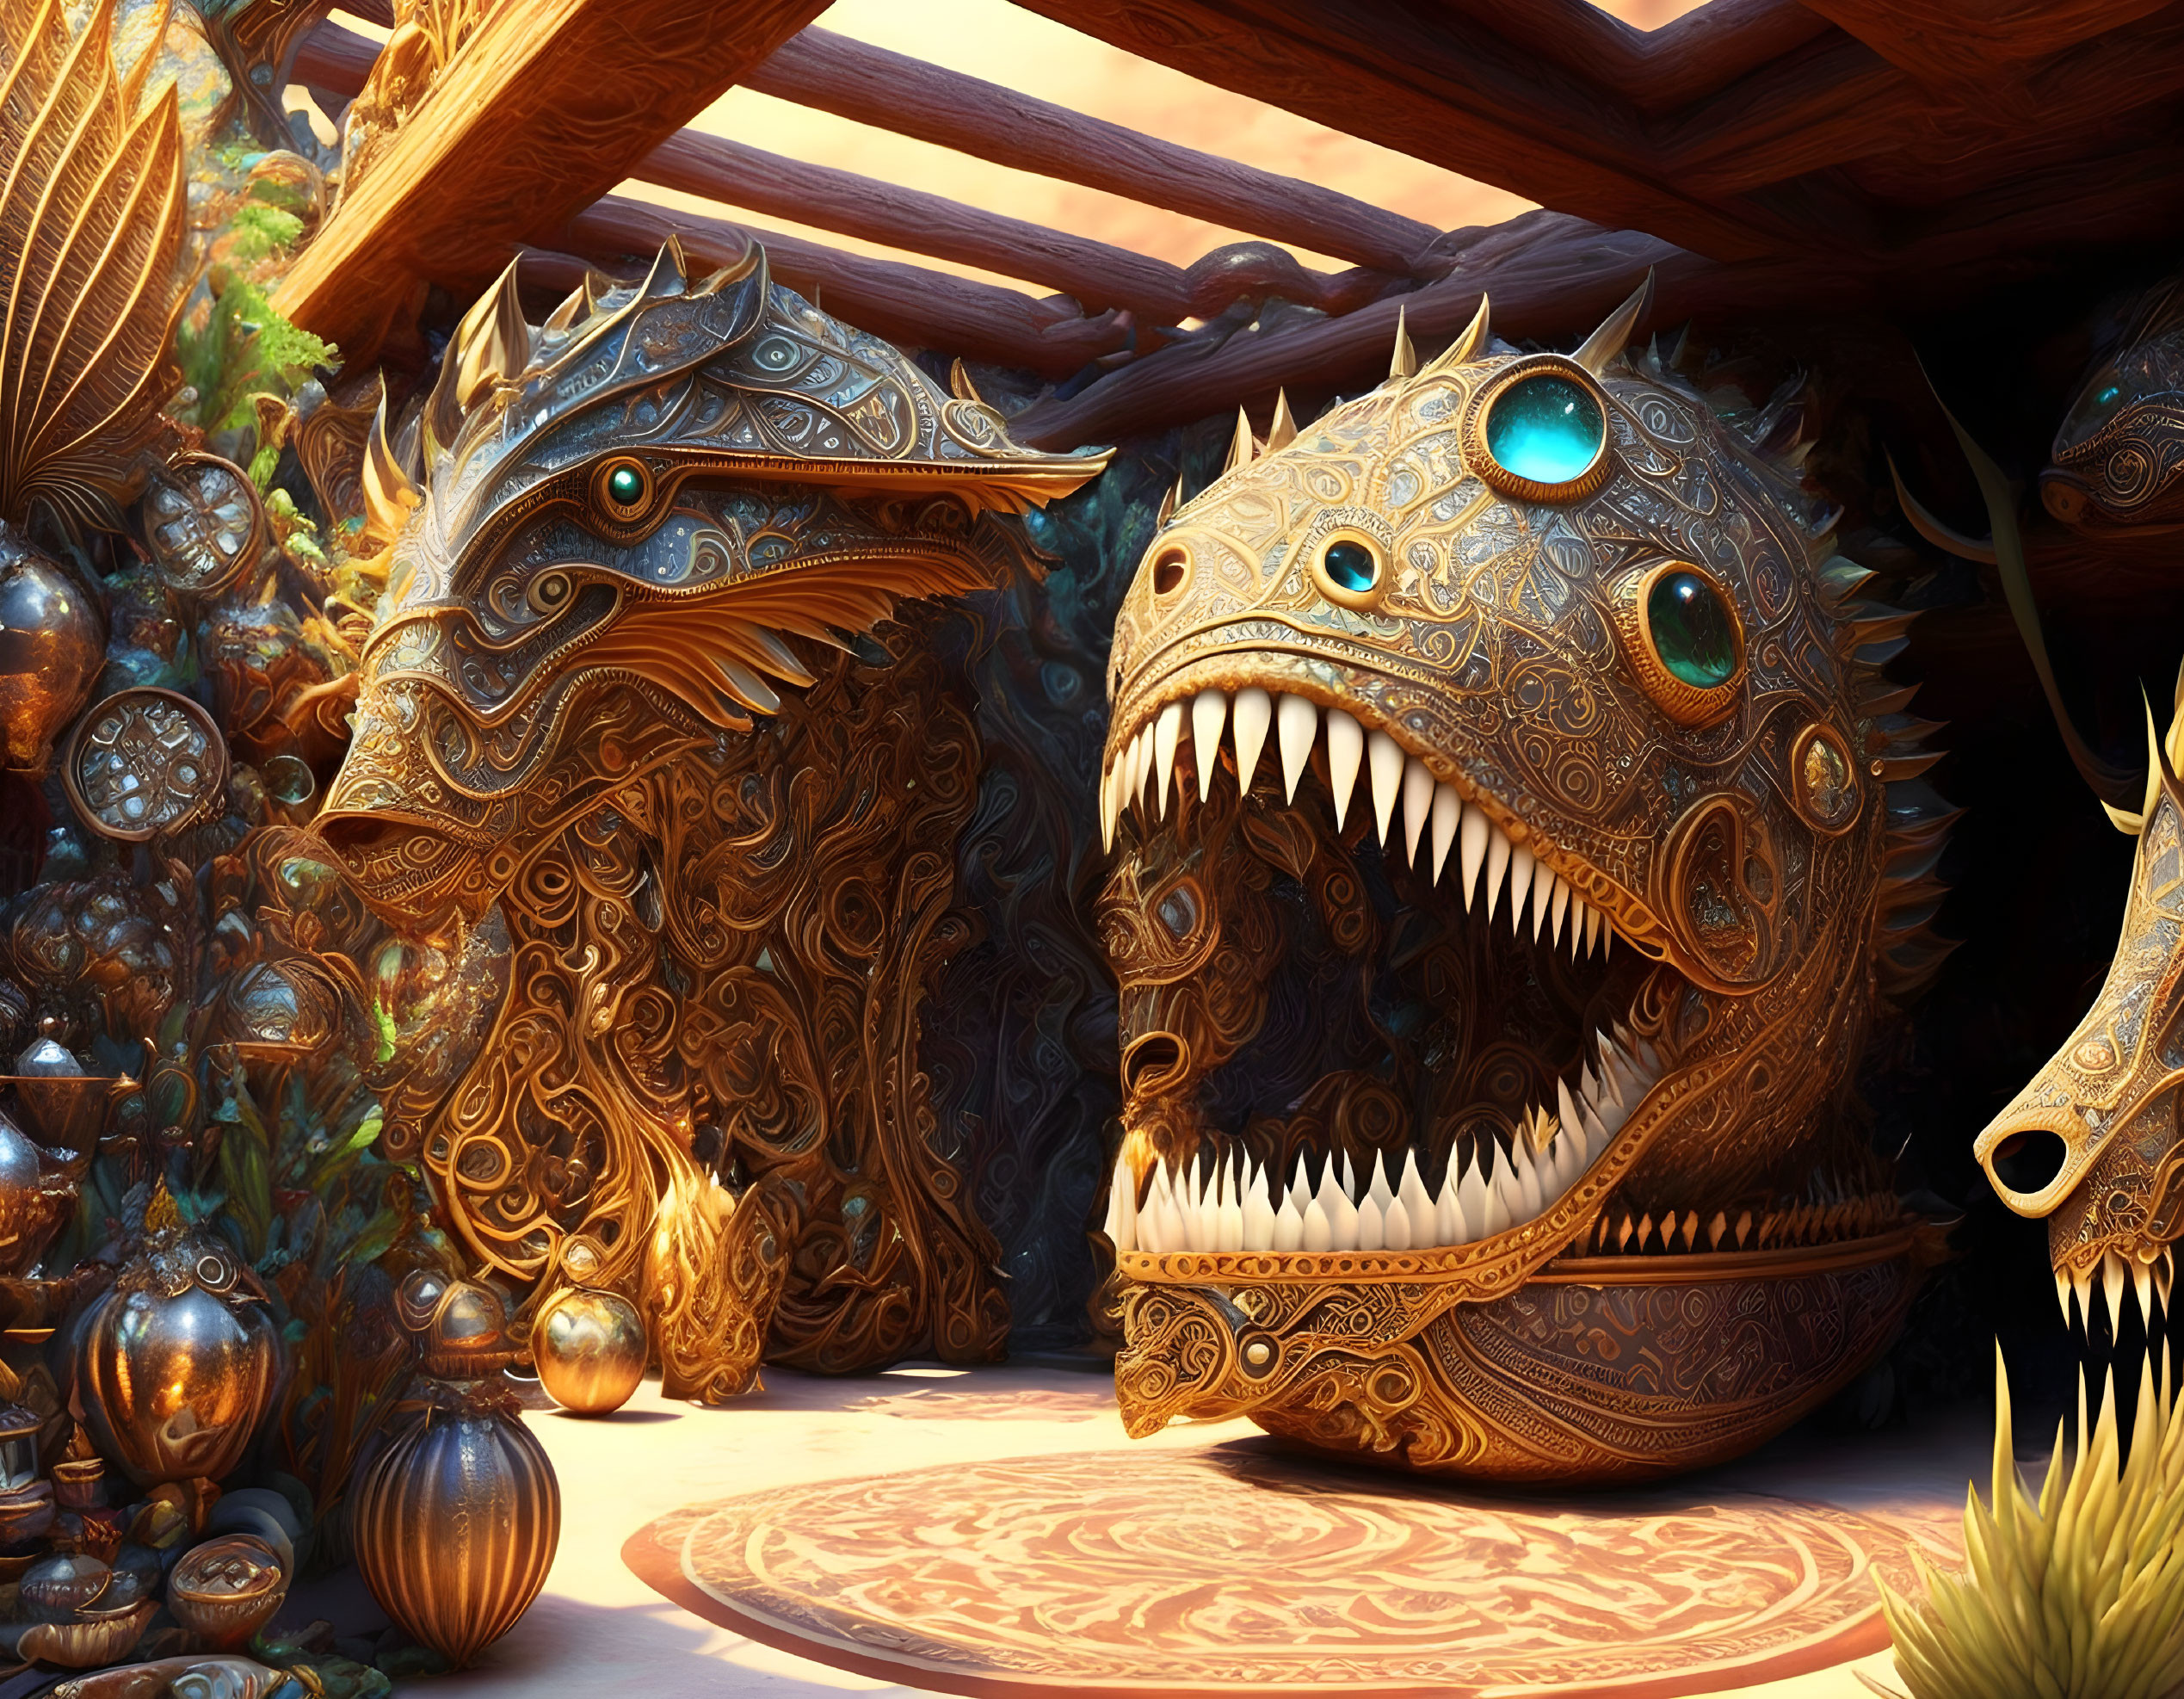 Detailed Artwork: Ornate Dragon-like Sculptures with Golden Pottery